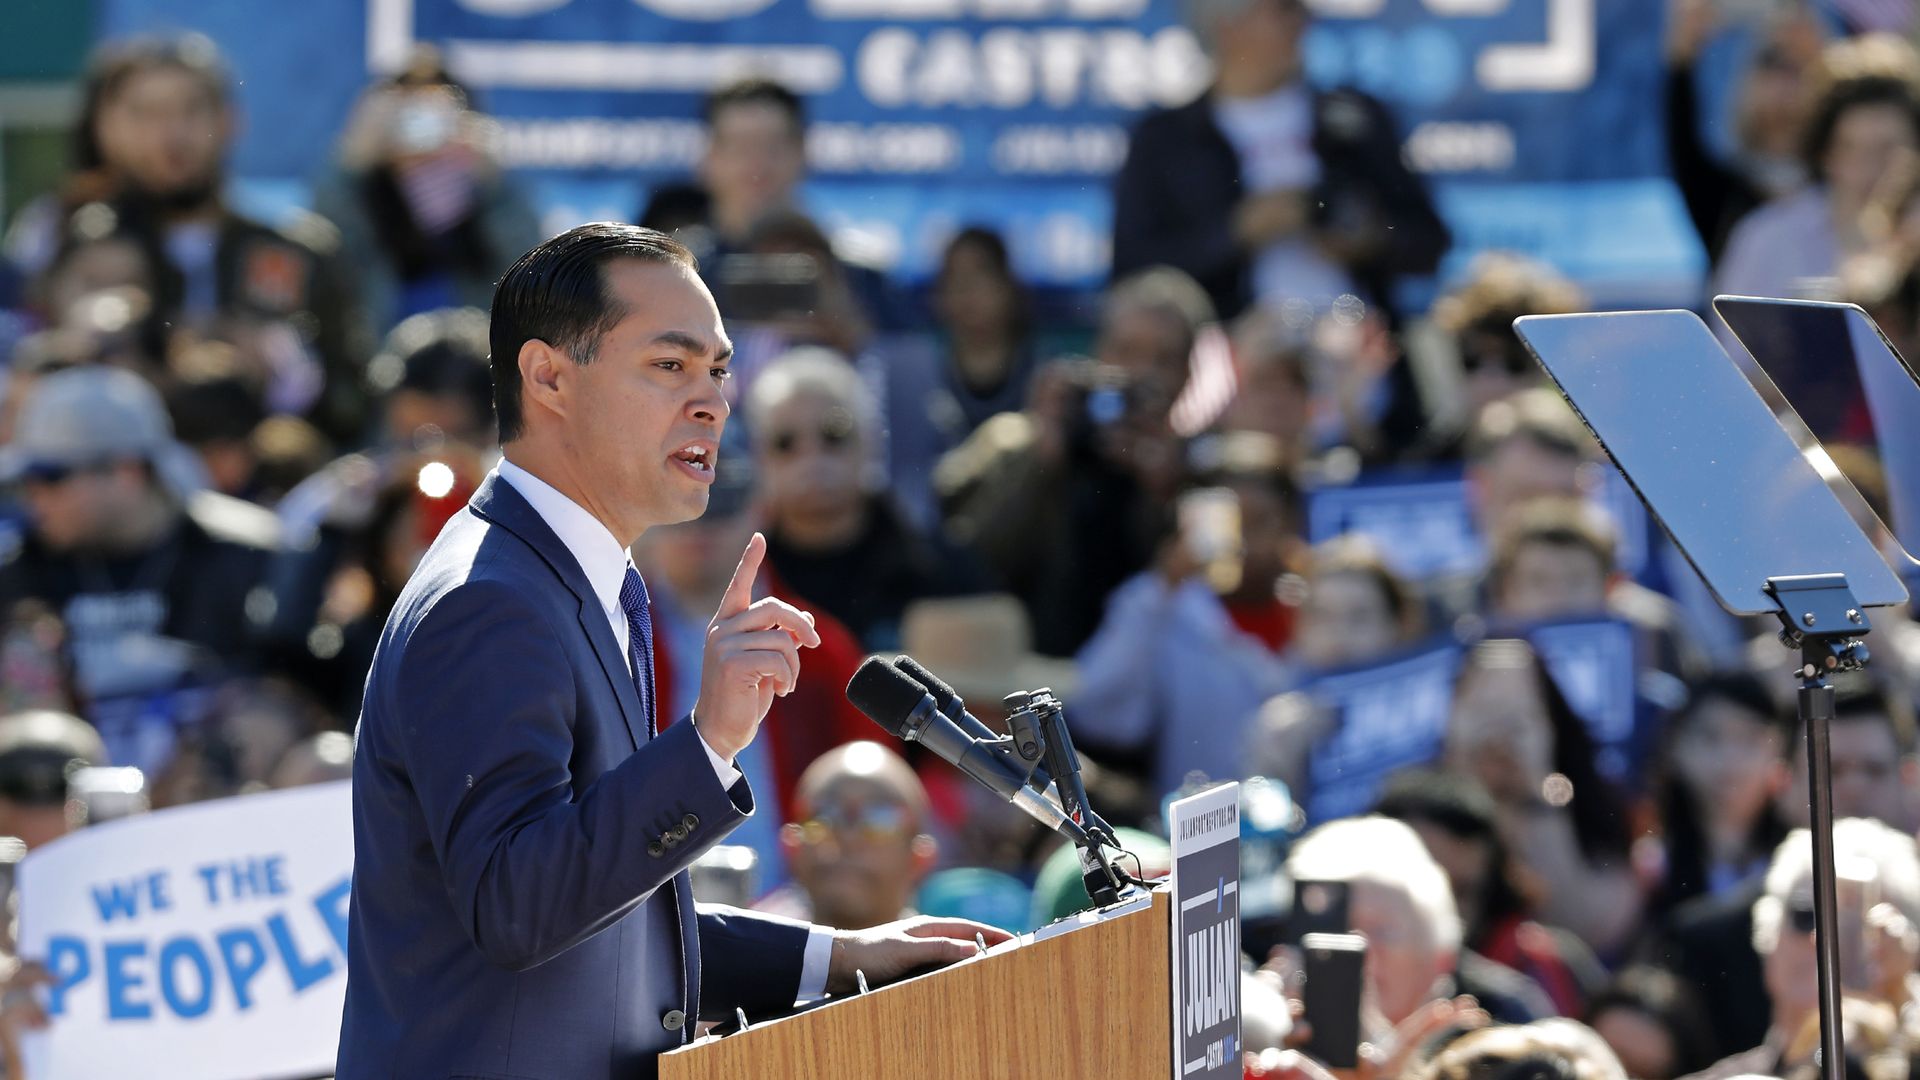 Julián Castro says he hasn’t yet reached 65,000 donors, which is one of the criteria used to qualify for the first Democratic debates.